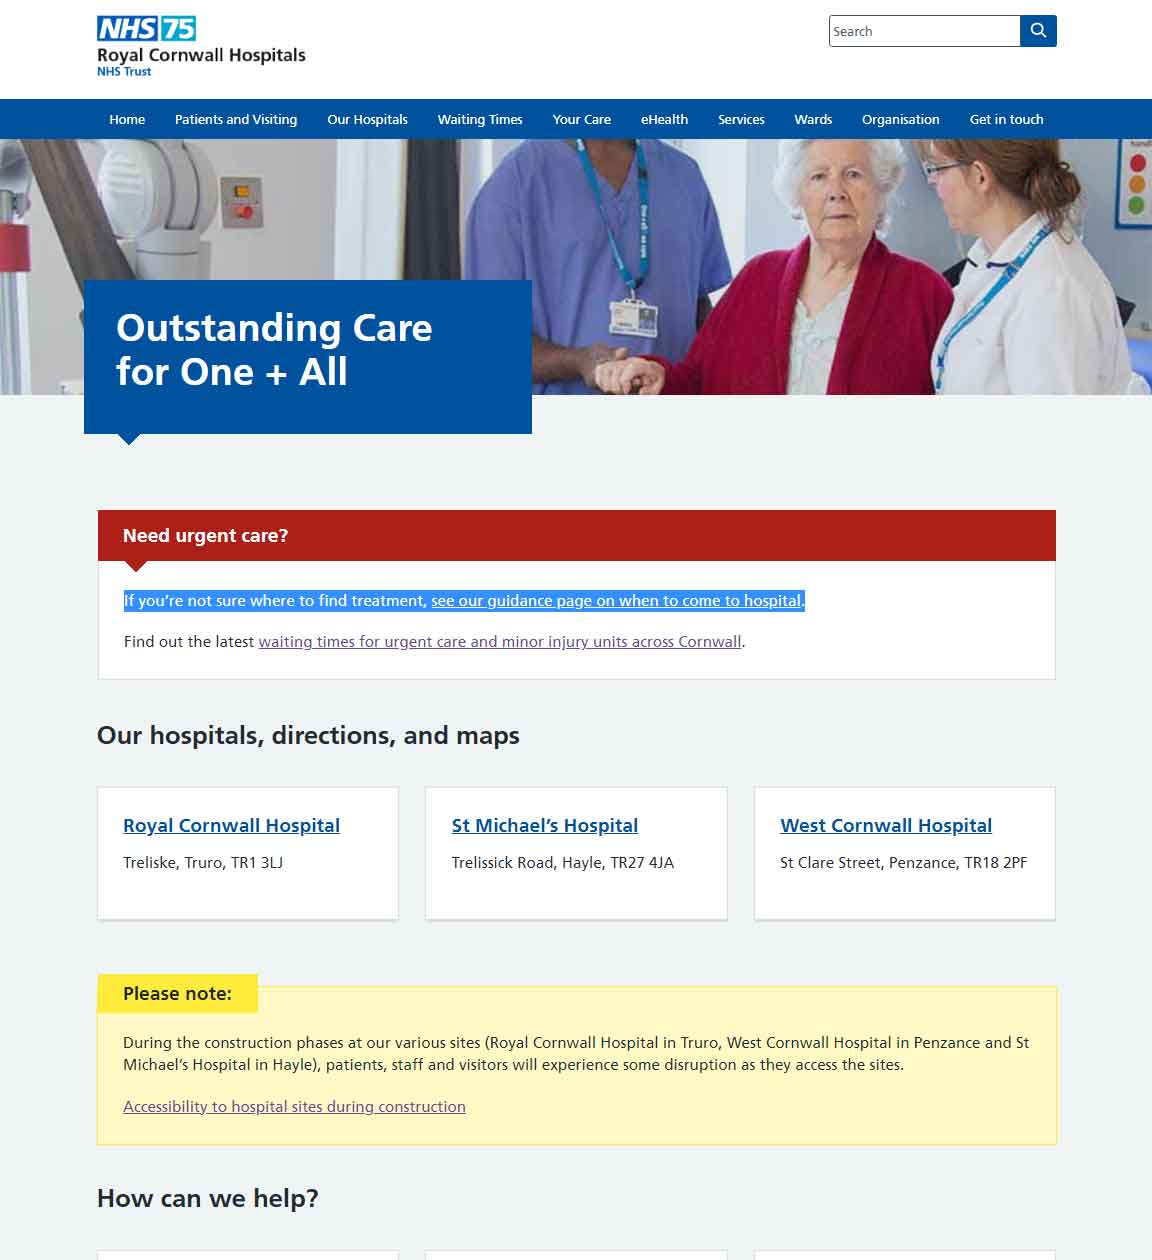 Homepage of the new Royal Cornwall Hospitals public website